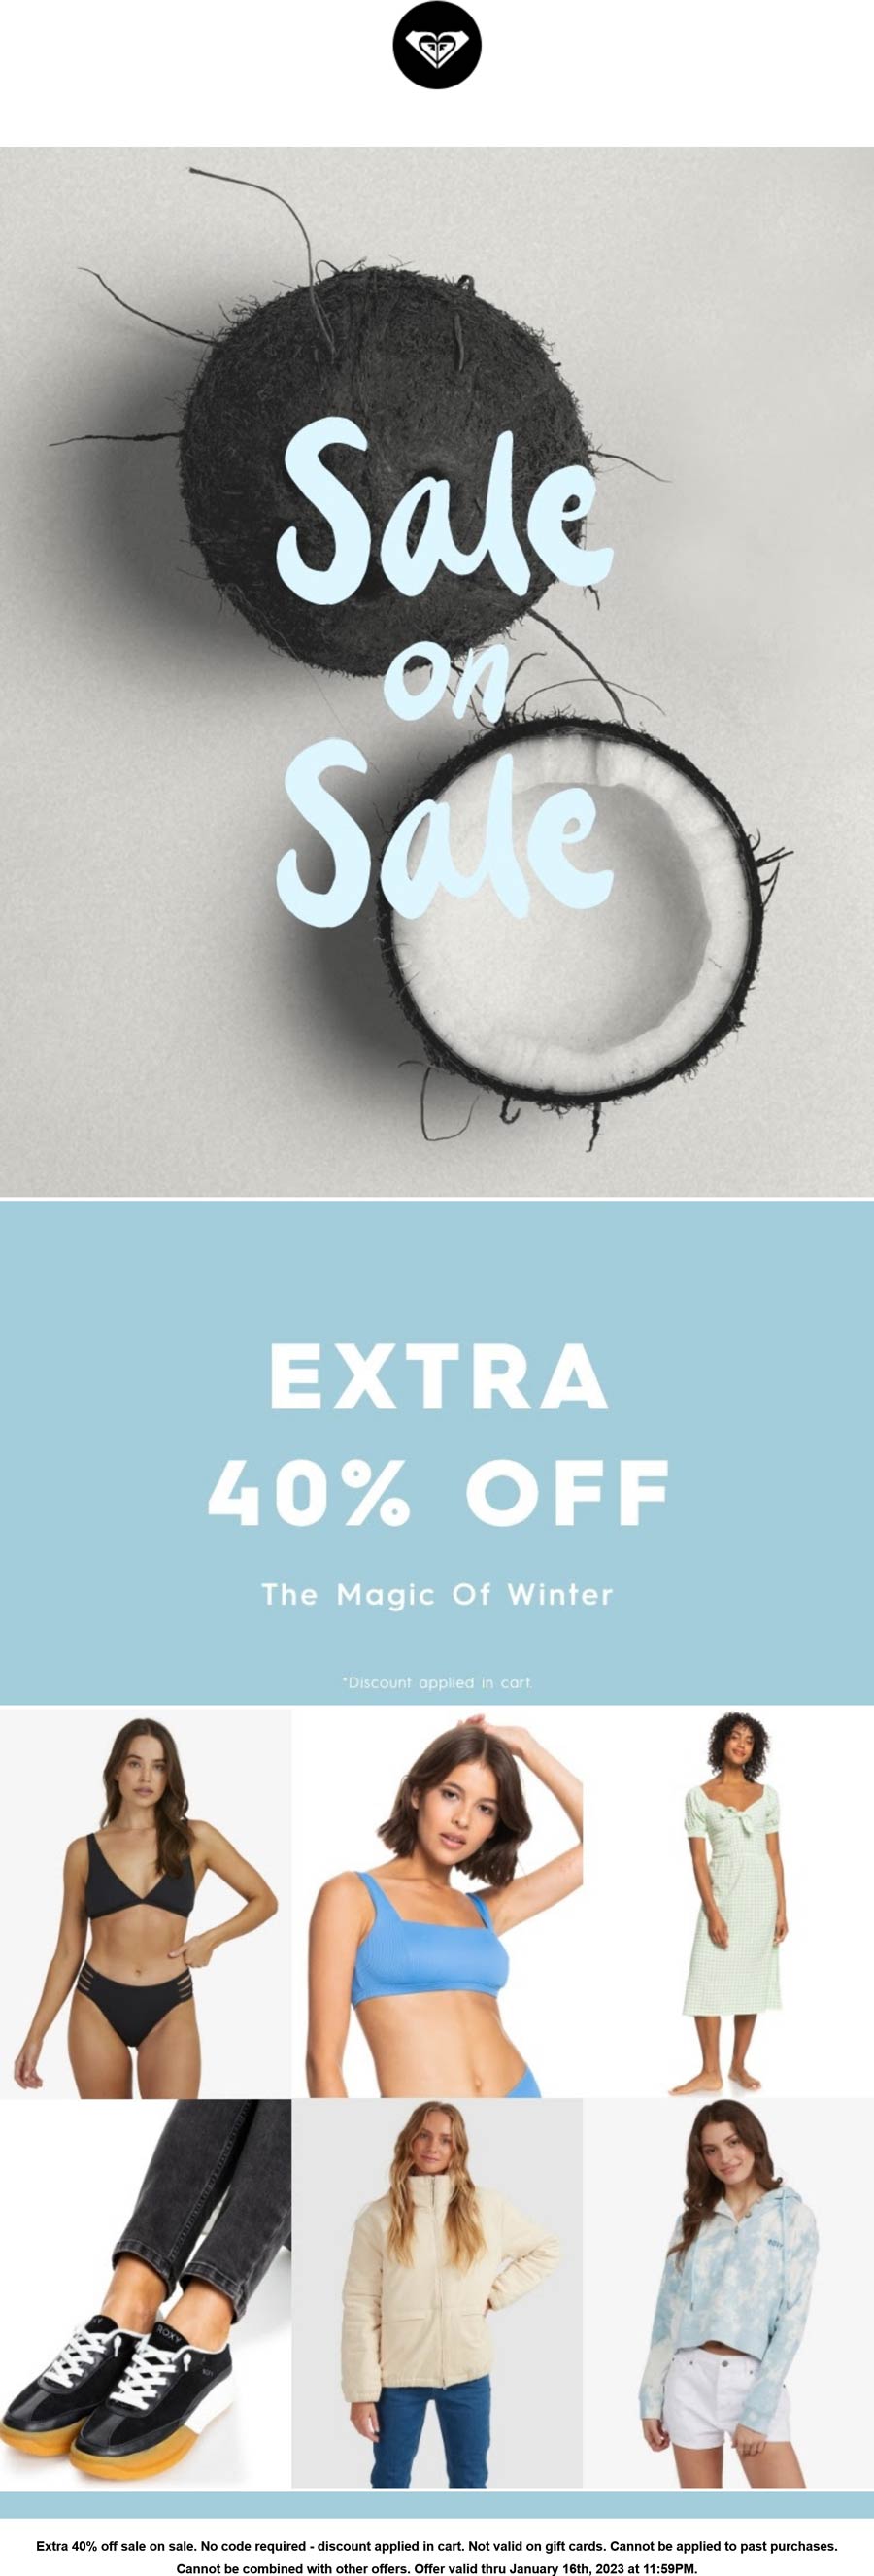 Roxy stores Coupon  Extra 40% off sale items online at Roxy #roxy 